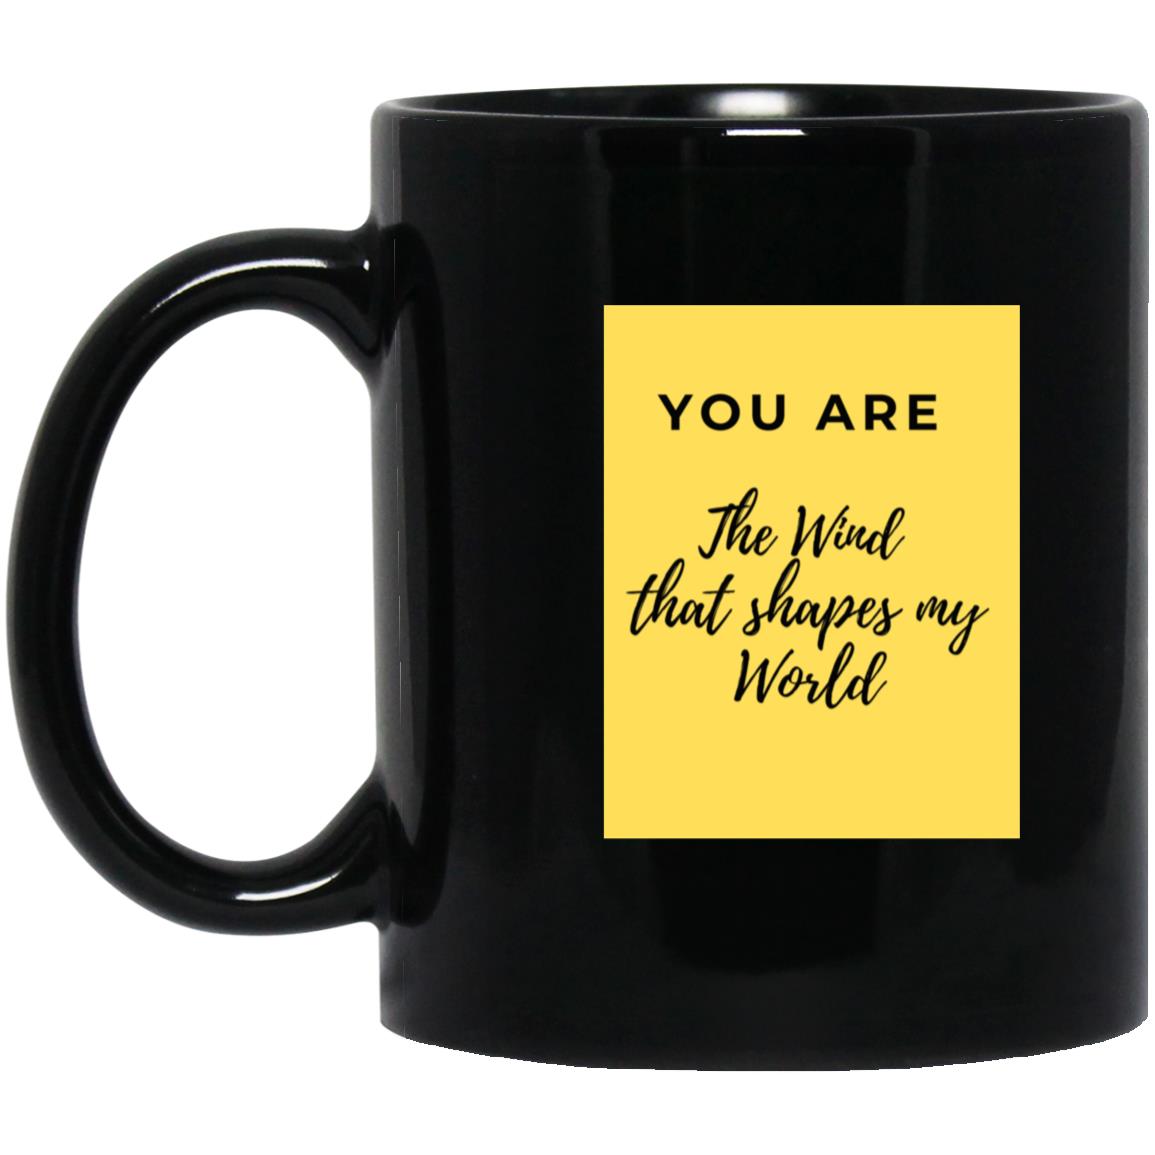 You are the Wind that shapes my world Mugs - Group 3